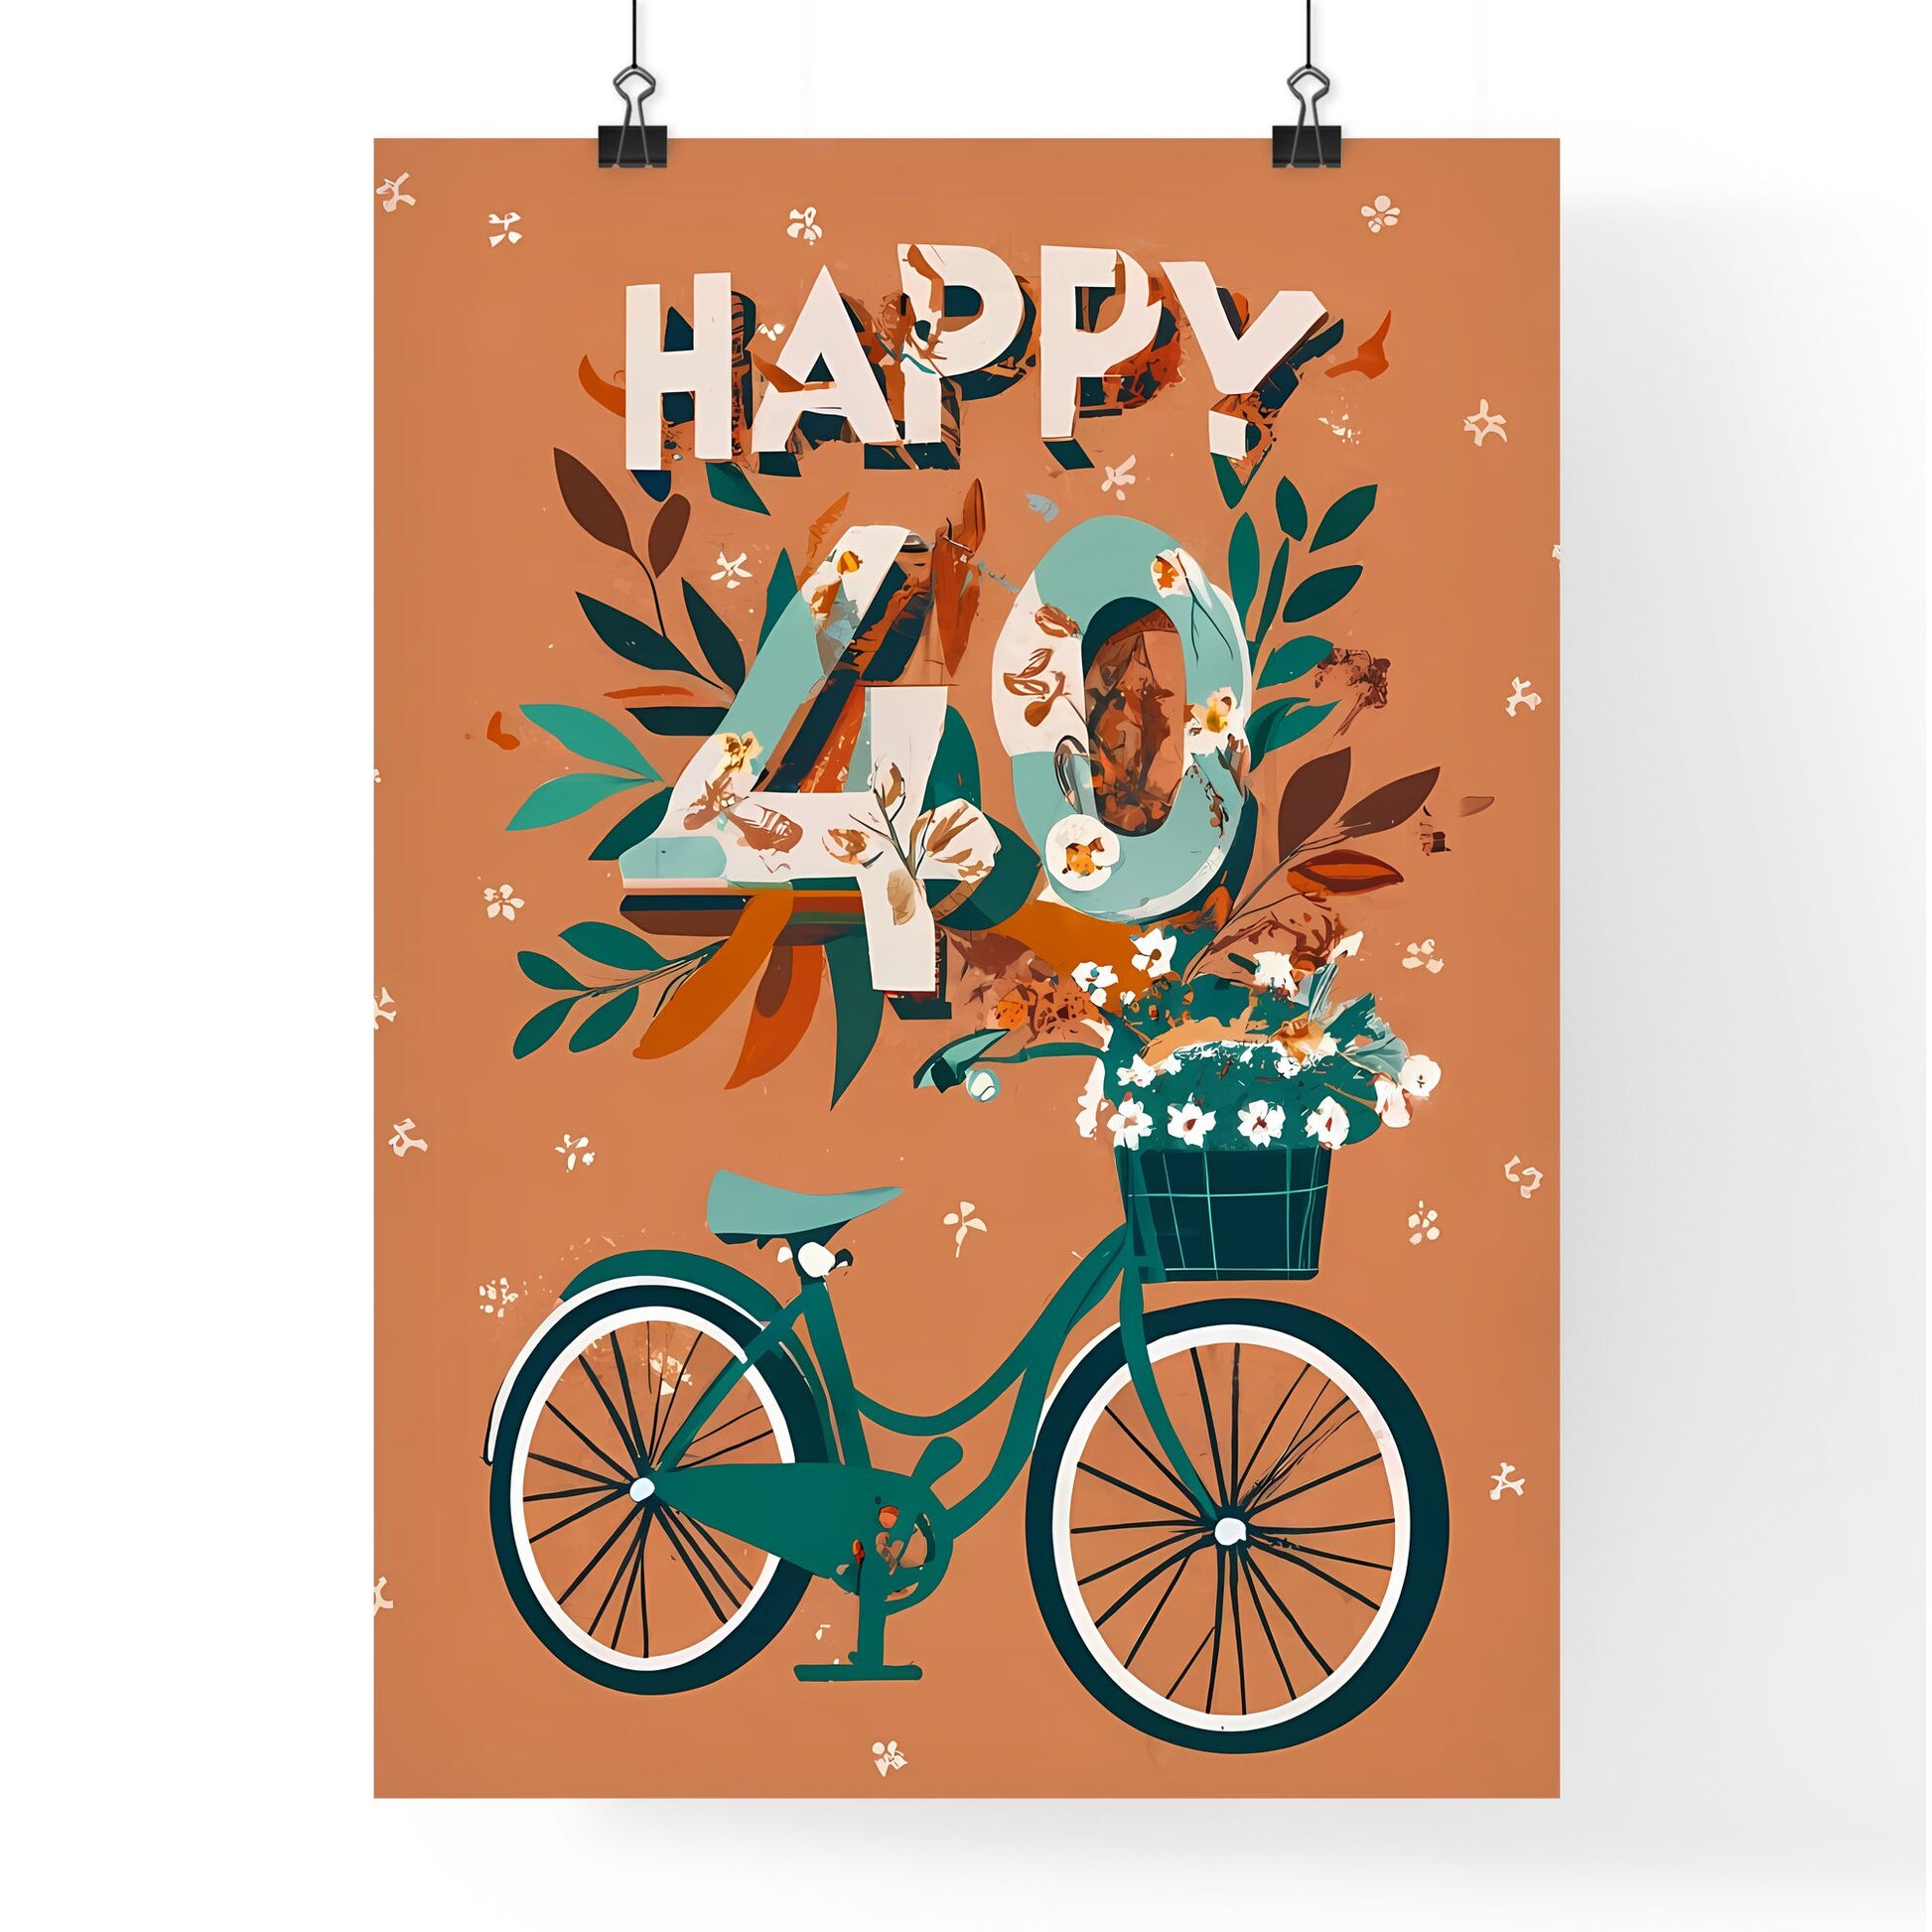 Happy 40Th - A Bicycle With Flowers On It Default Title